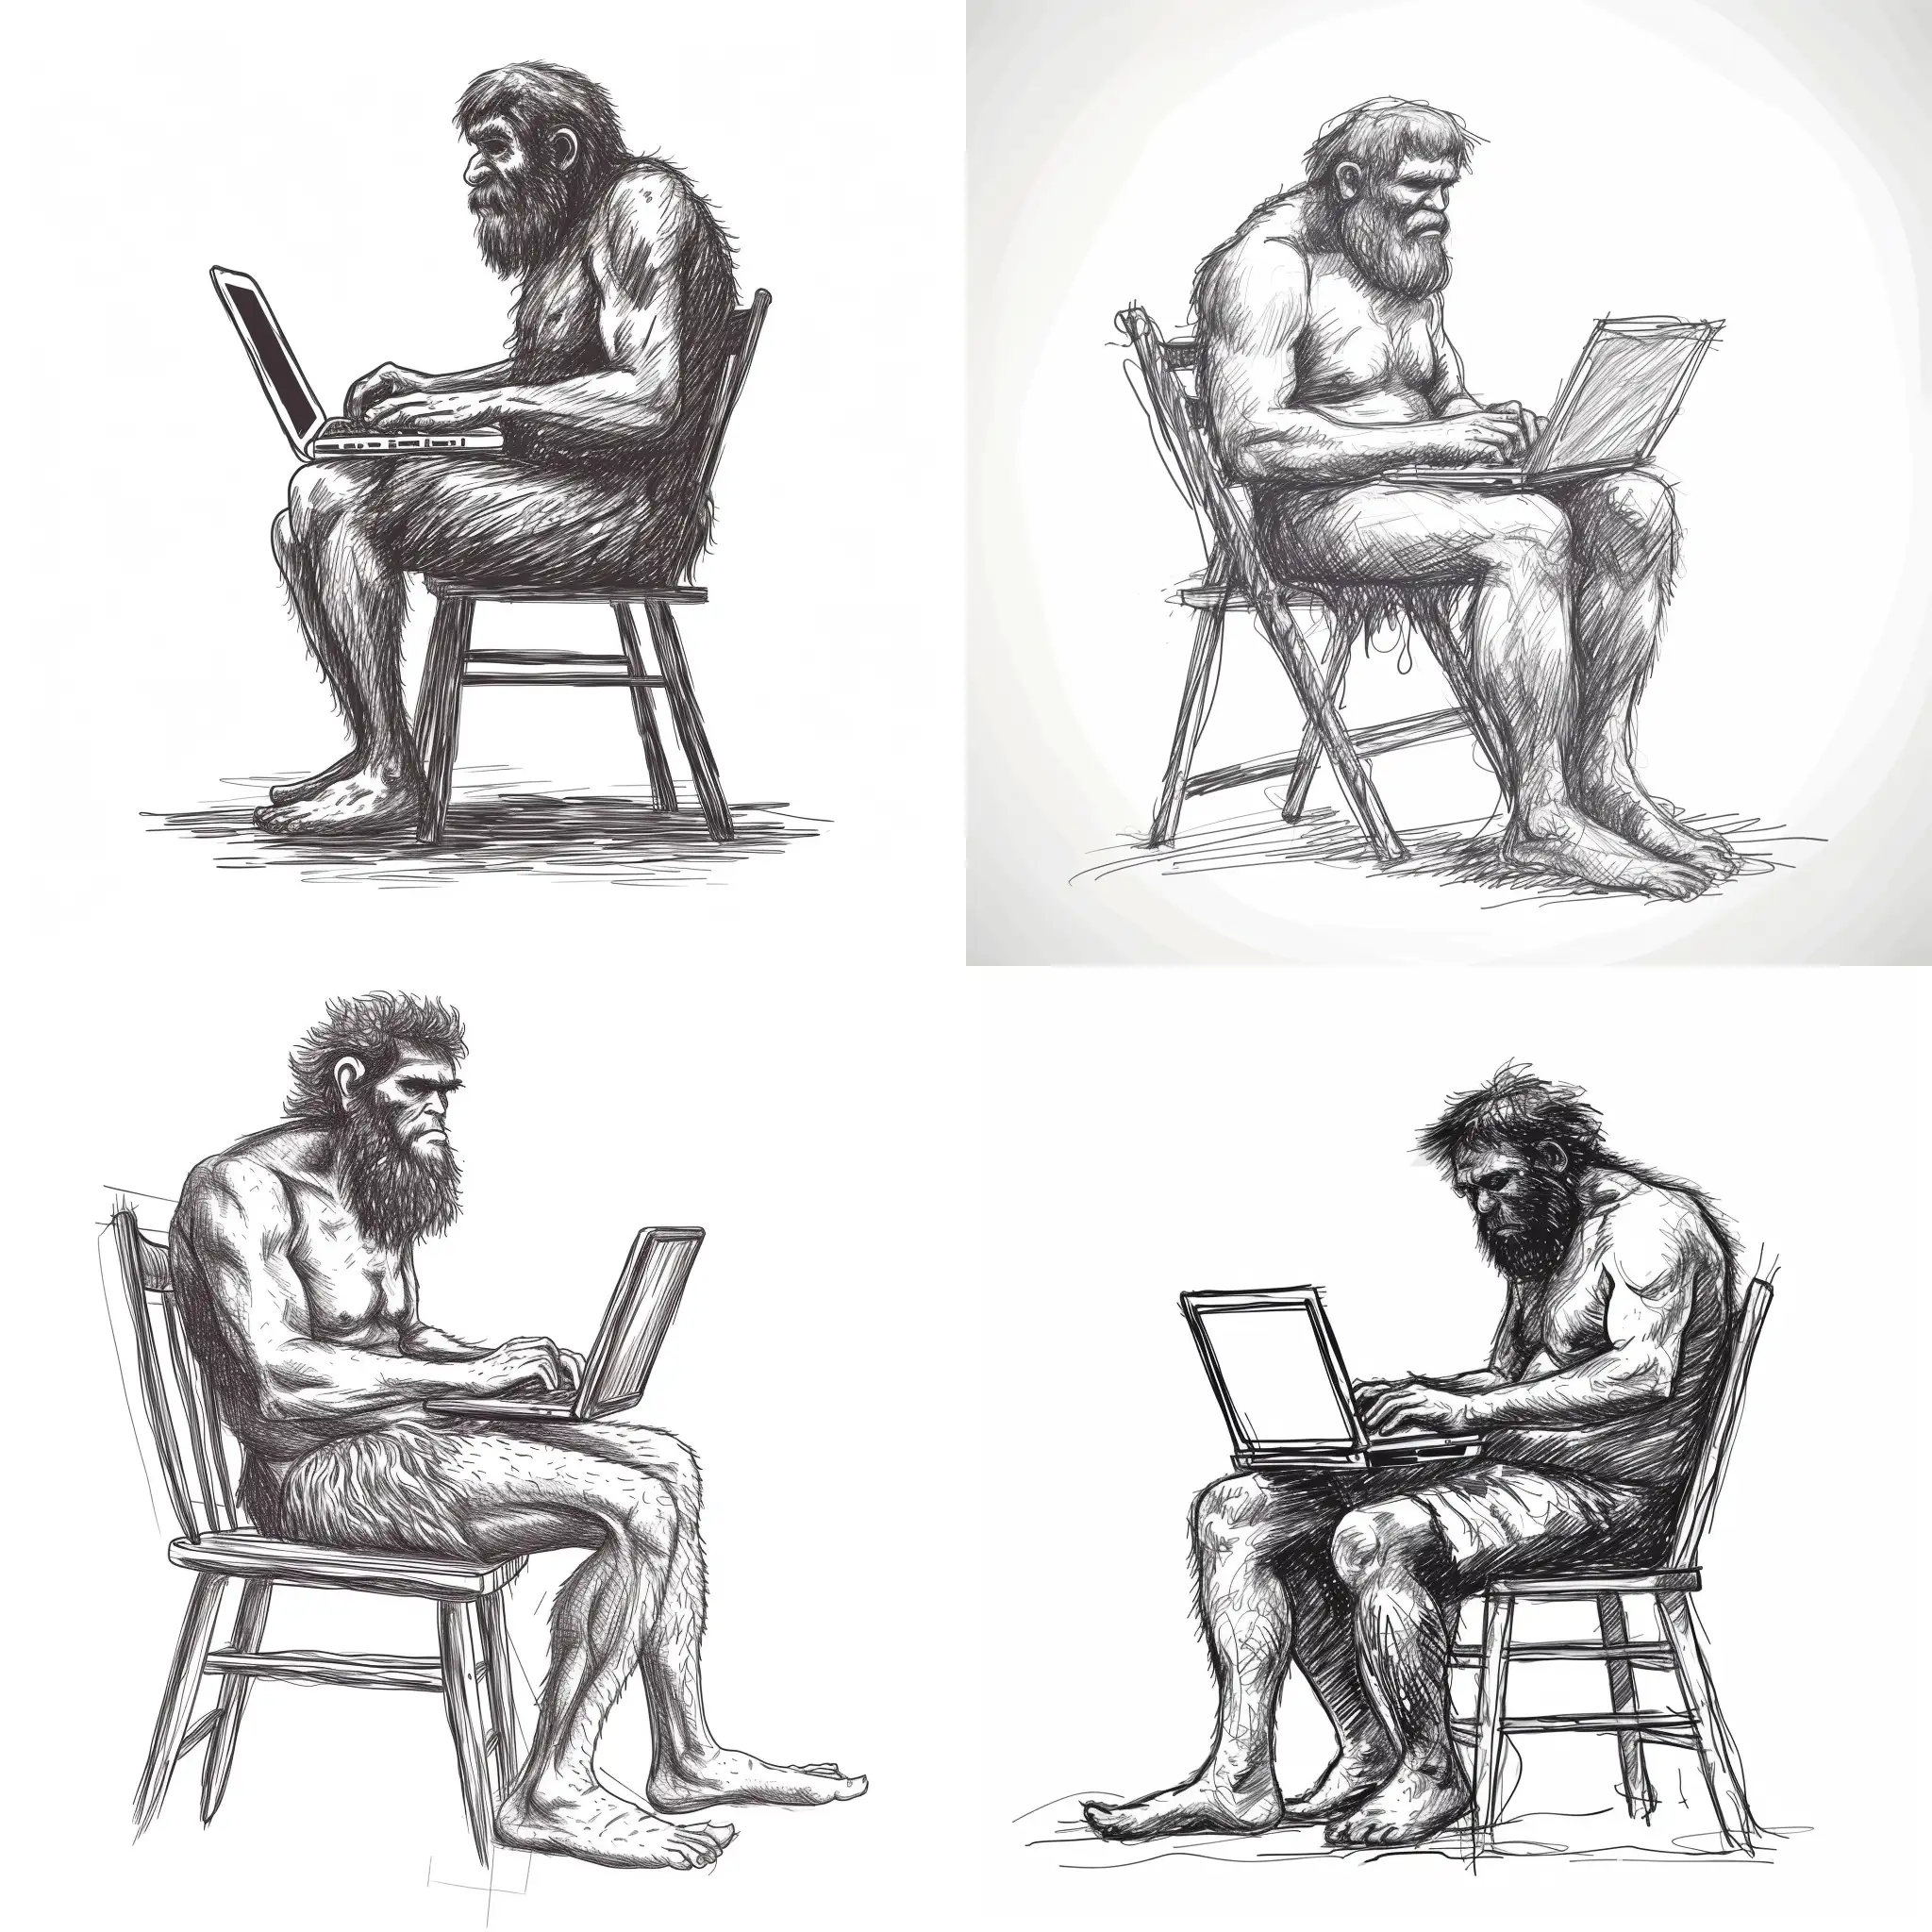 Caveman-Illustration-Ancient-Technological-Advancements-in-a-Modern-Twist